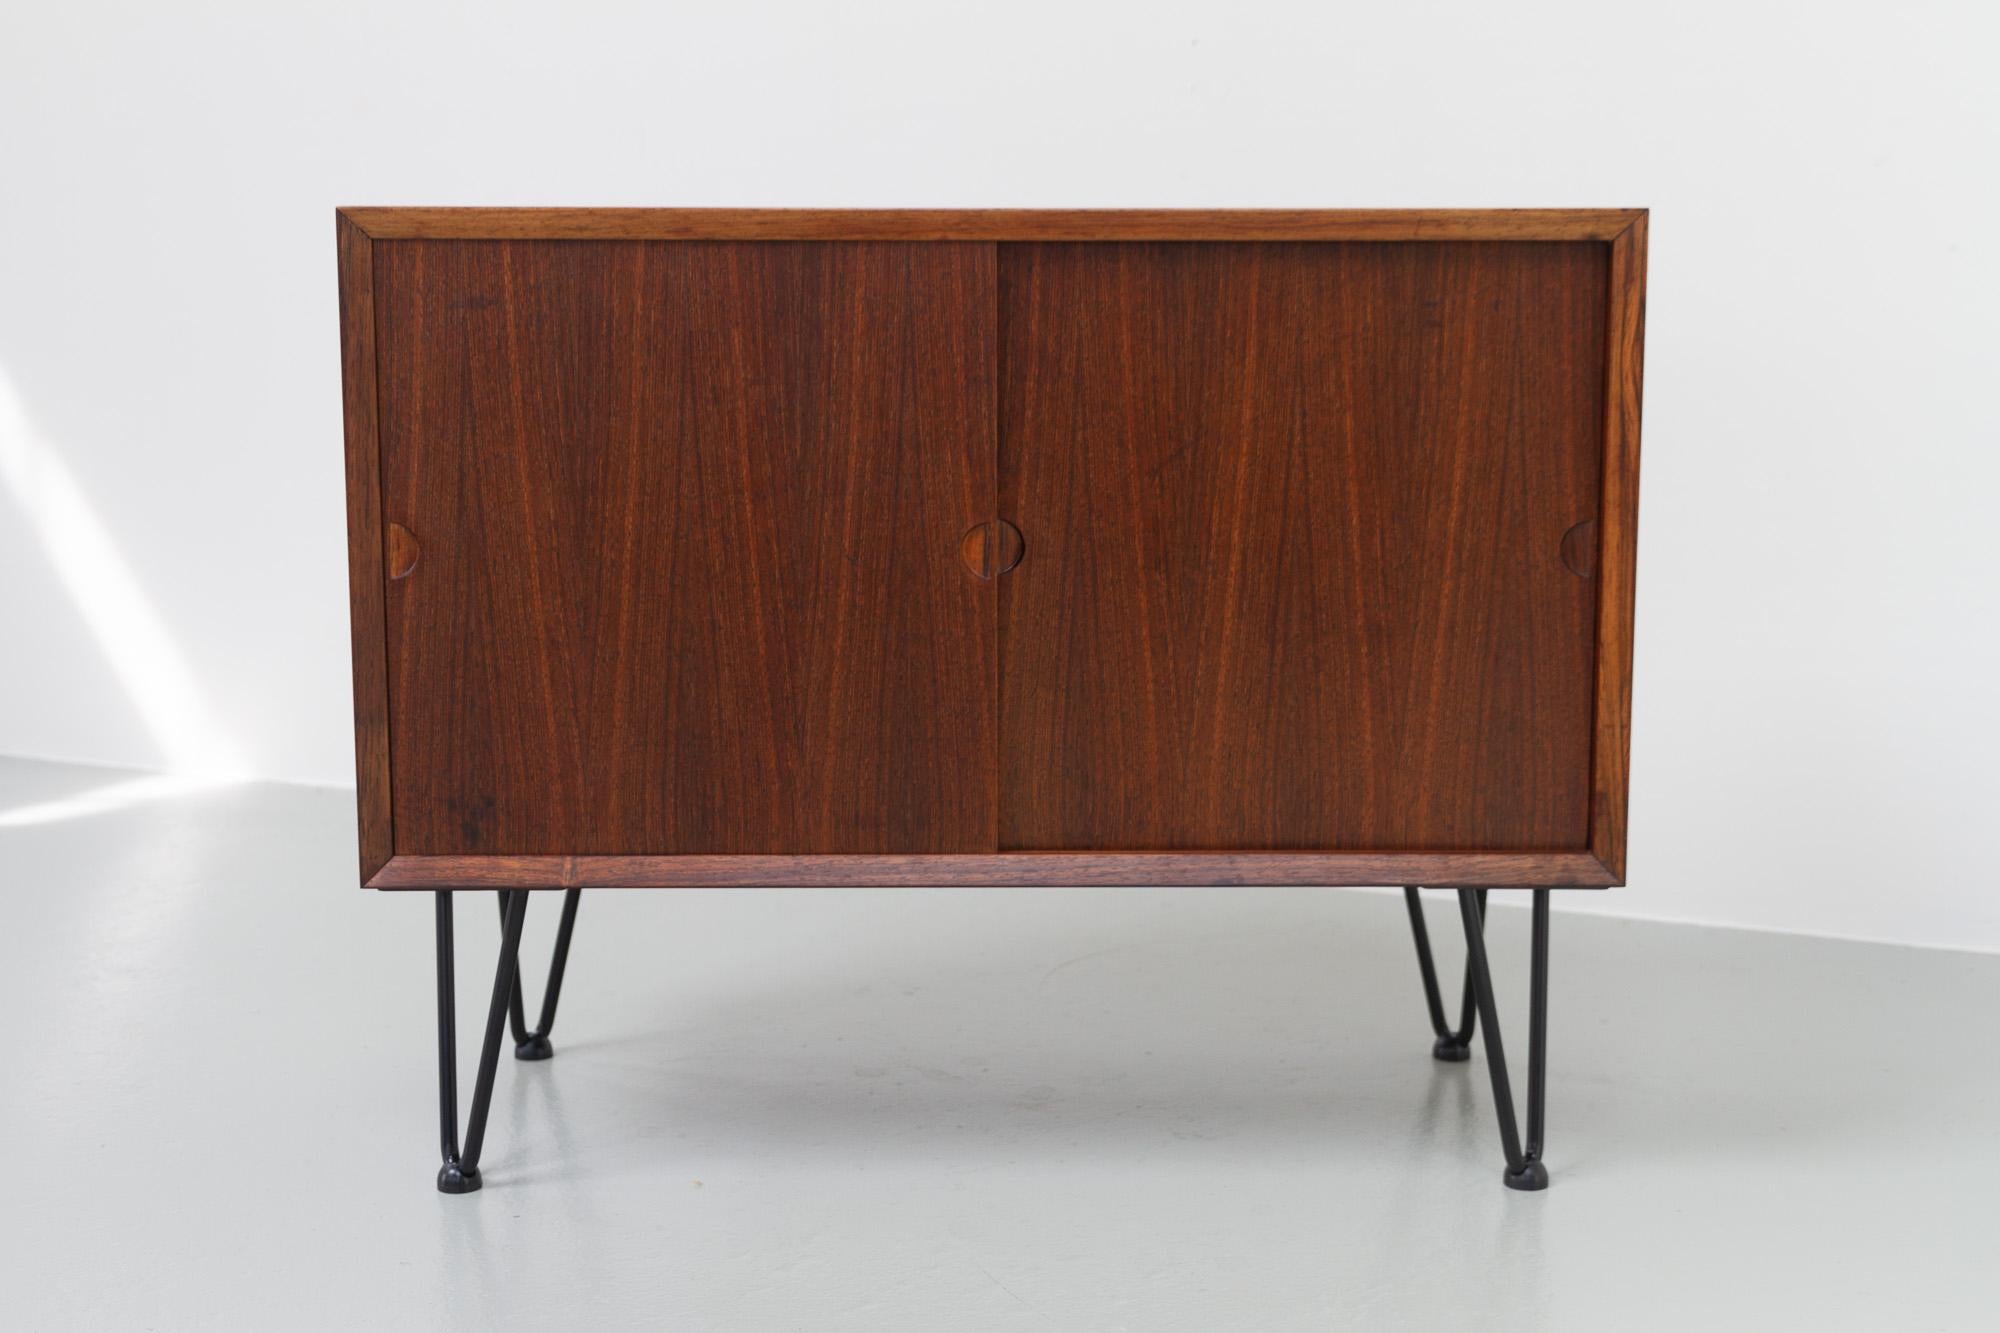 Small Danish Modern Rosewood Sideboard by Poul Cadovius for Cado, Denmark, 1960s.
Vintage Danish Rosewood sideboard with sliding doors and one adjustable shelf inside. Beautiful Rosewood/palisander veneer with expressive grain pattern. Fitted with